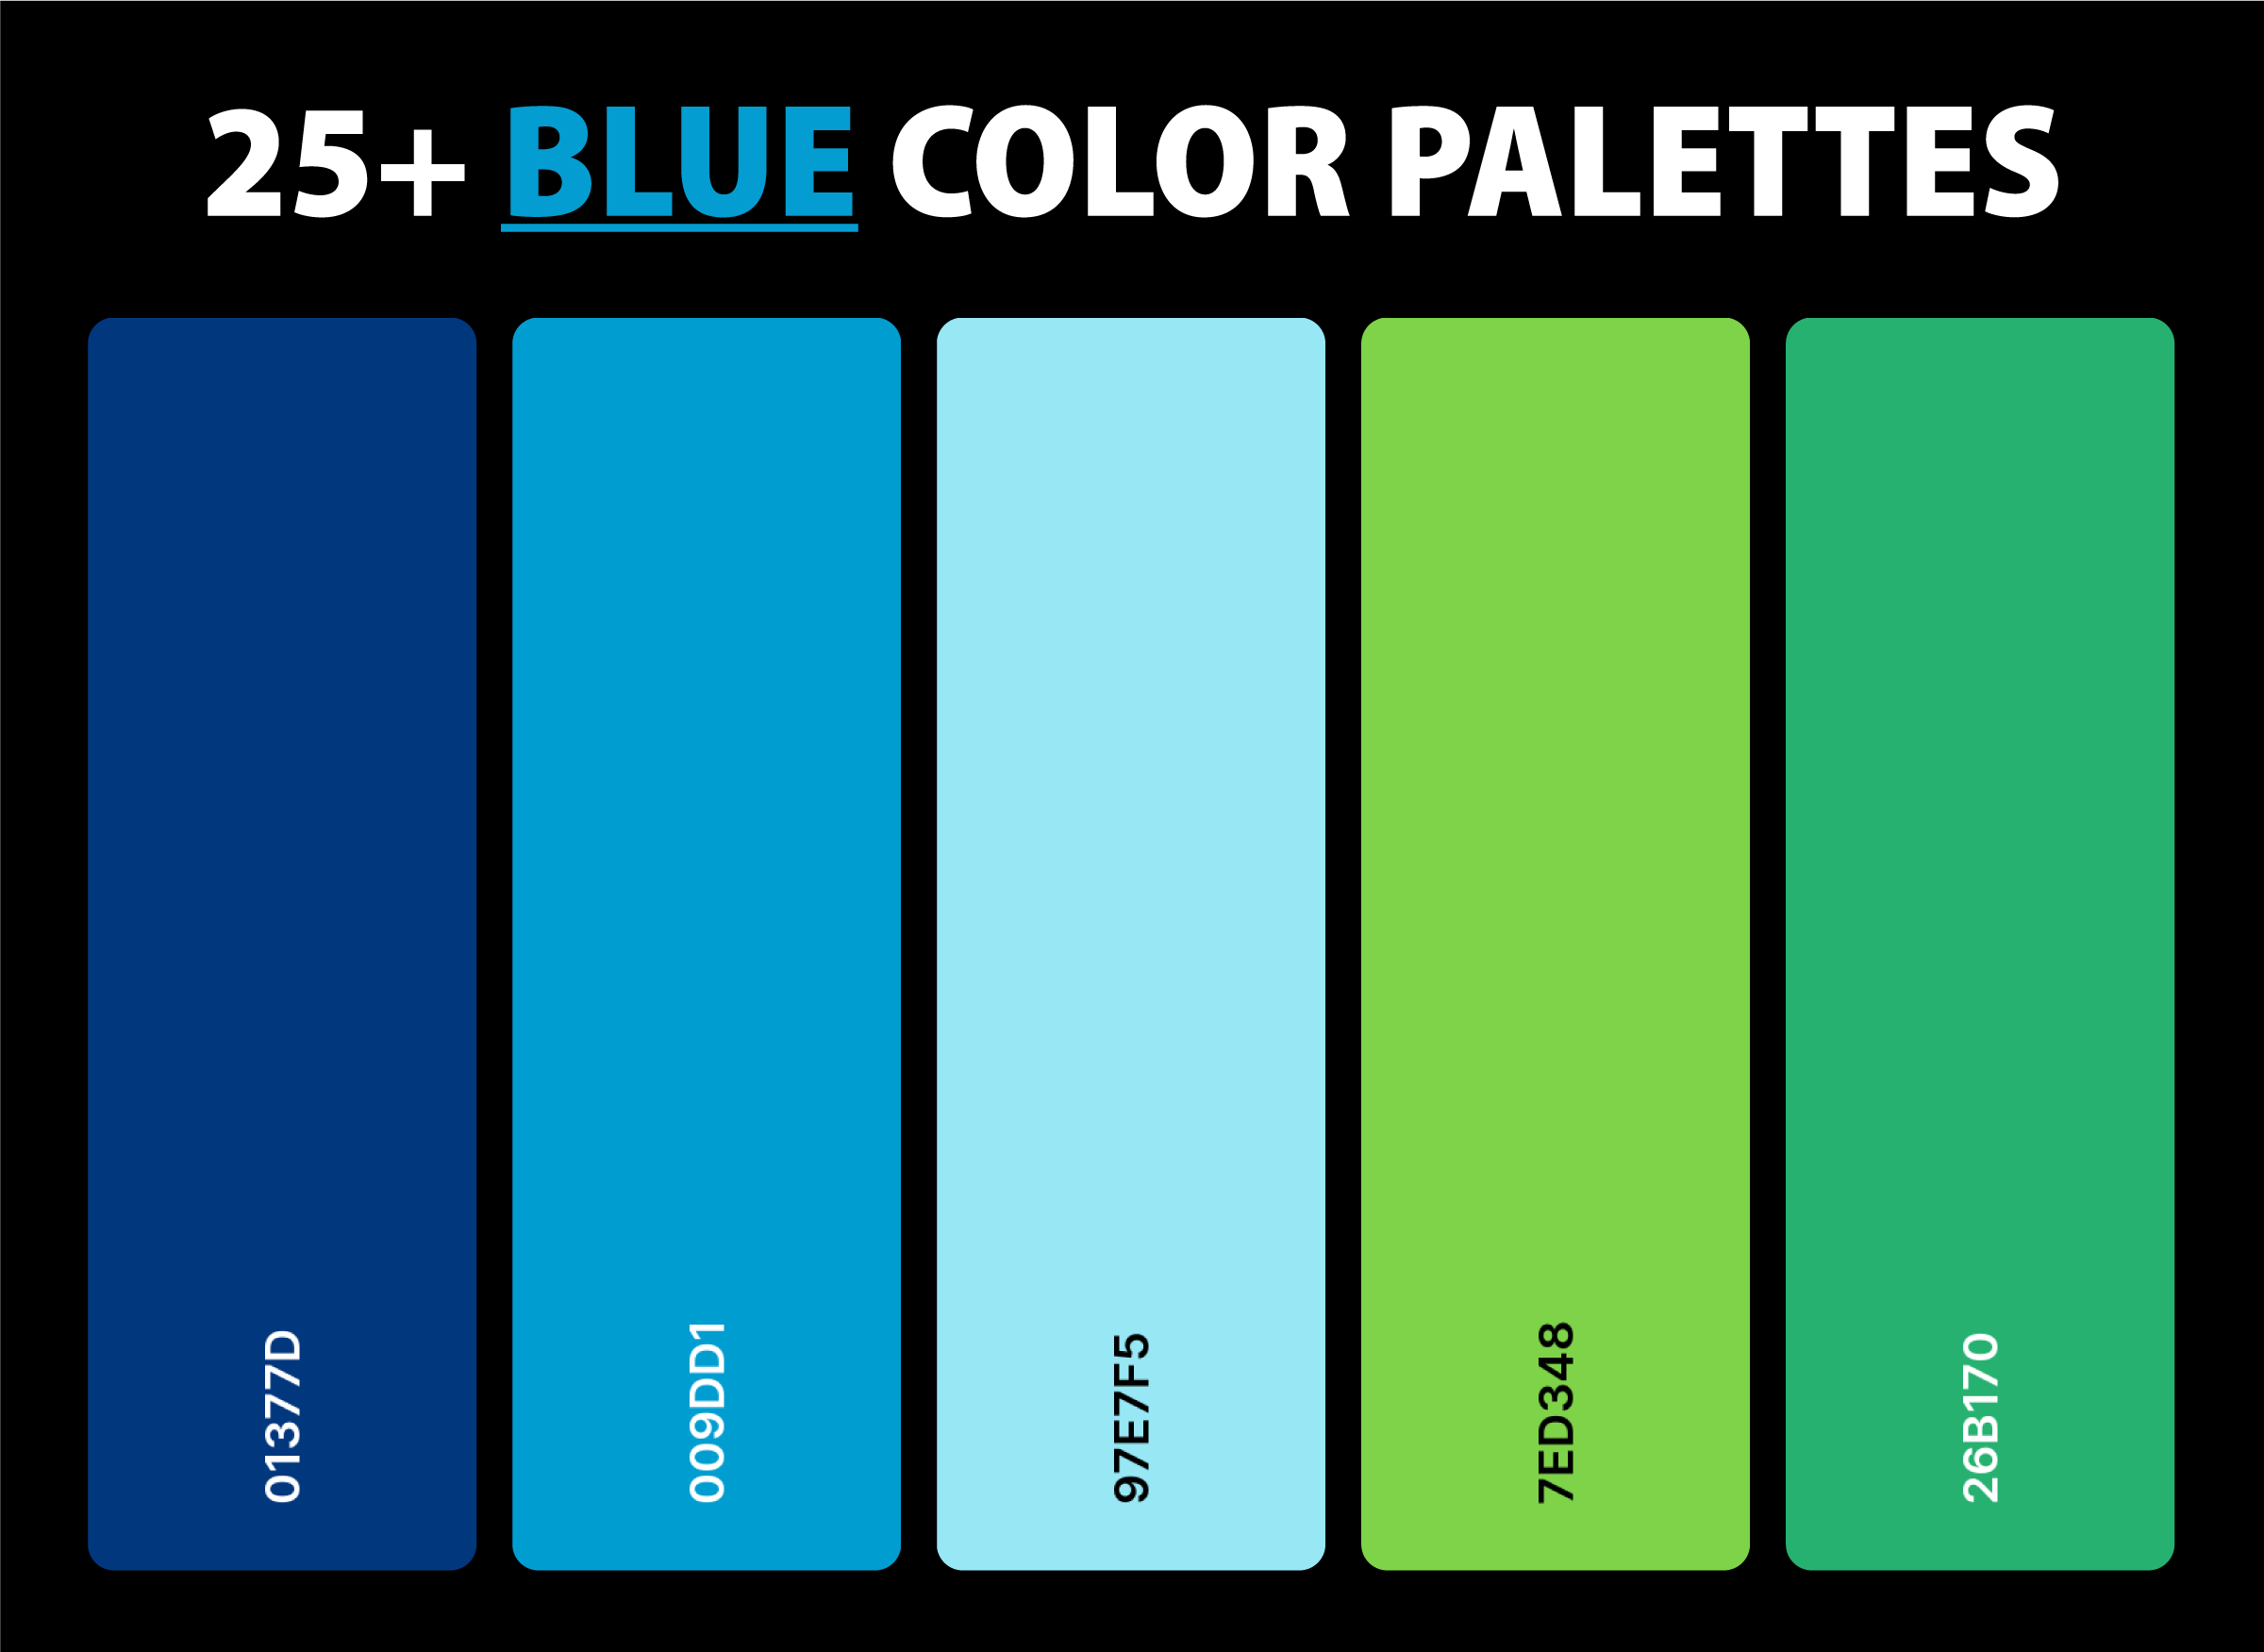 Blue-and-Green-Color-Palette-25-Blue-Color-Palettes-with-with-Hex-Codes